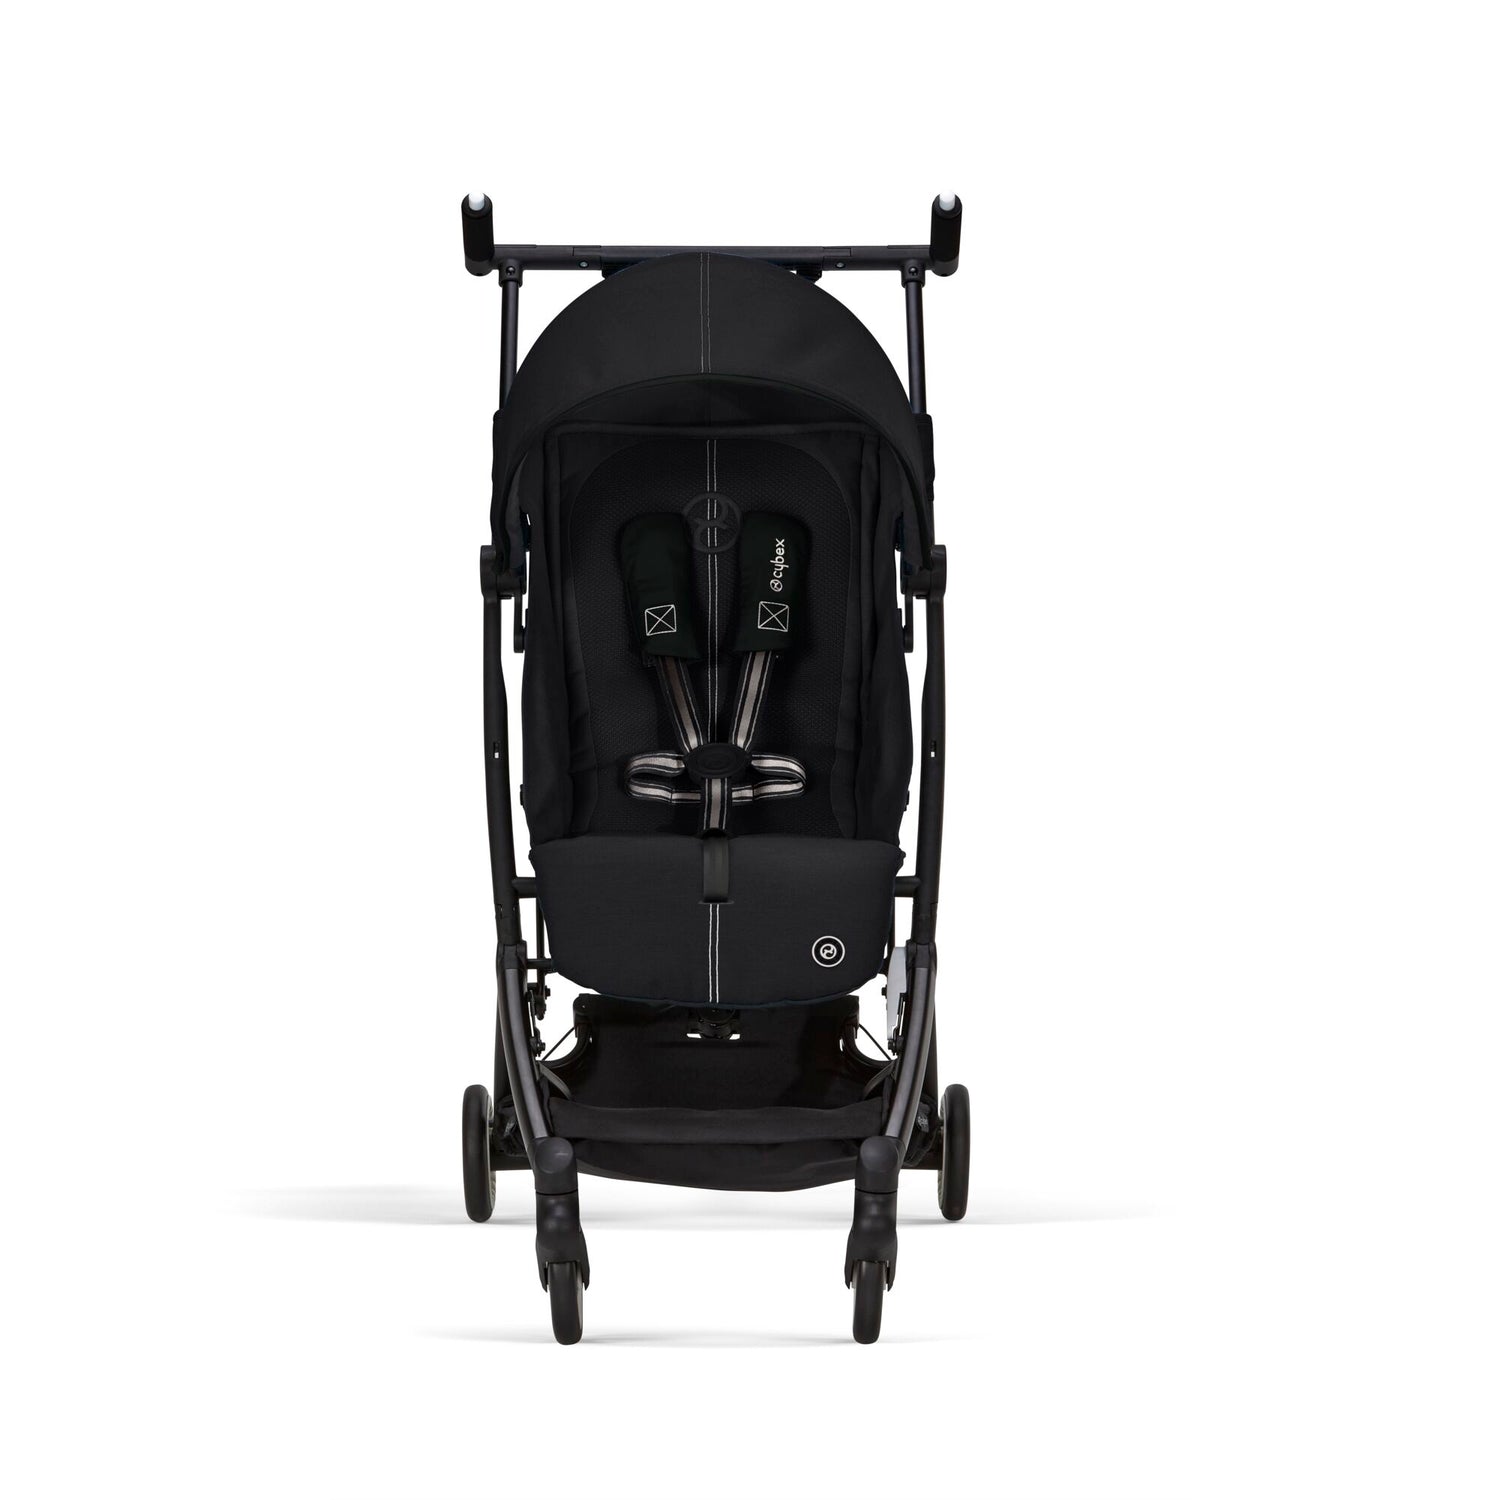 Buggy LIBELLE Cybex Gold bei www.harmony-ambiente.at | Buggy Libelle Moon Black